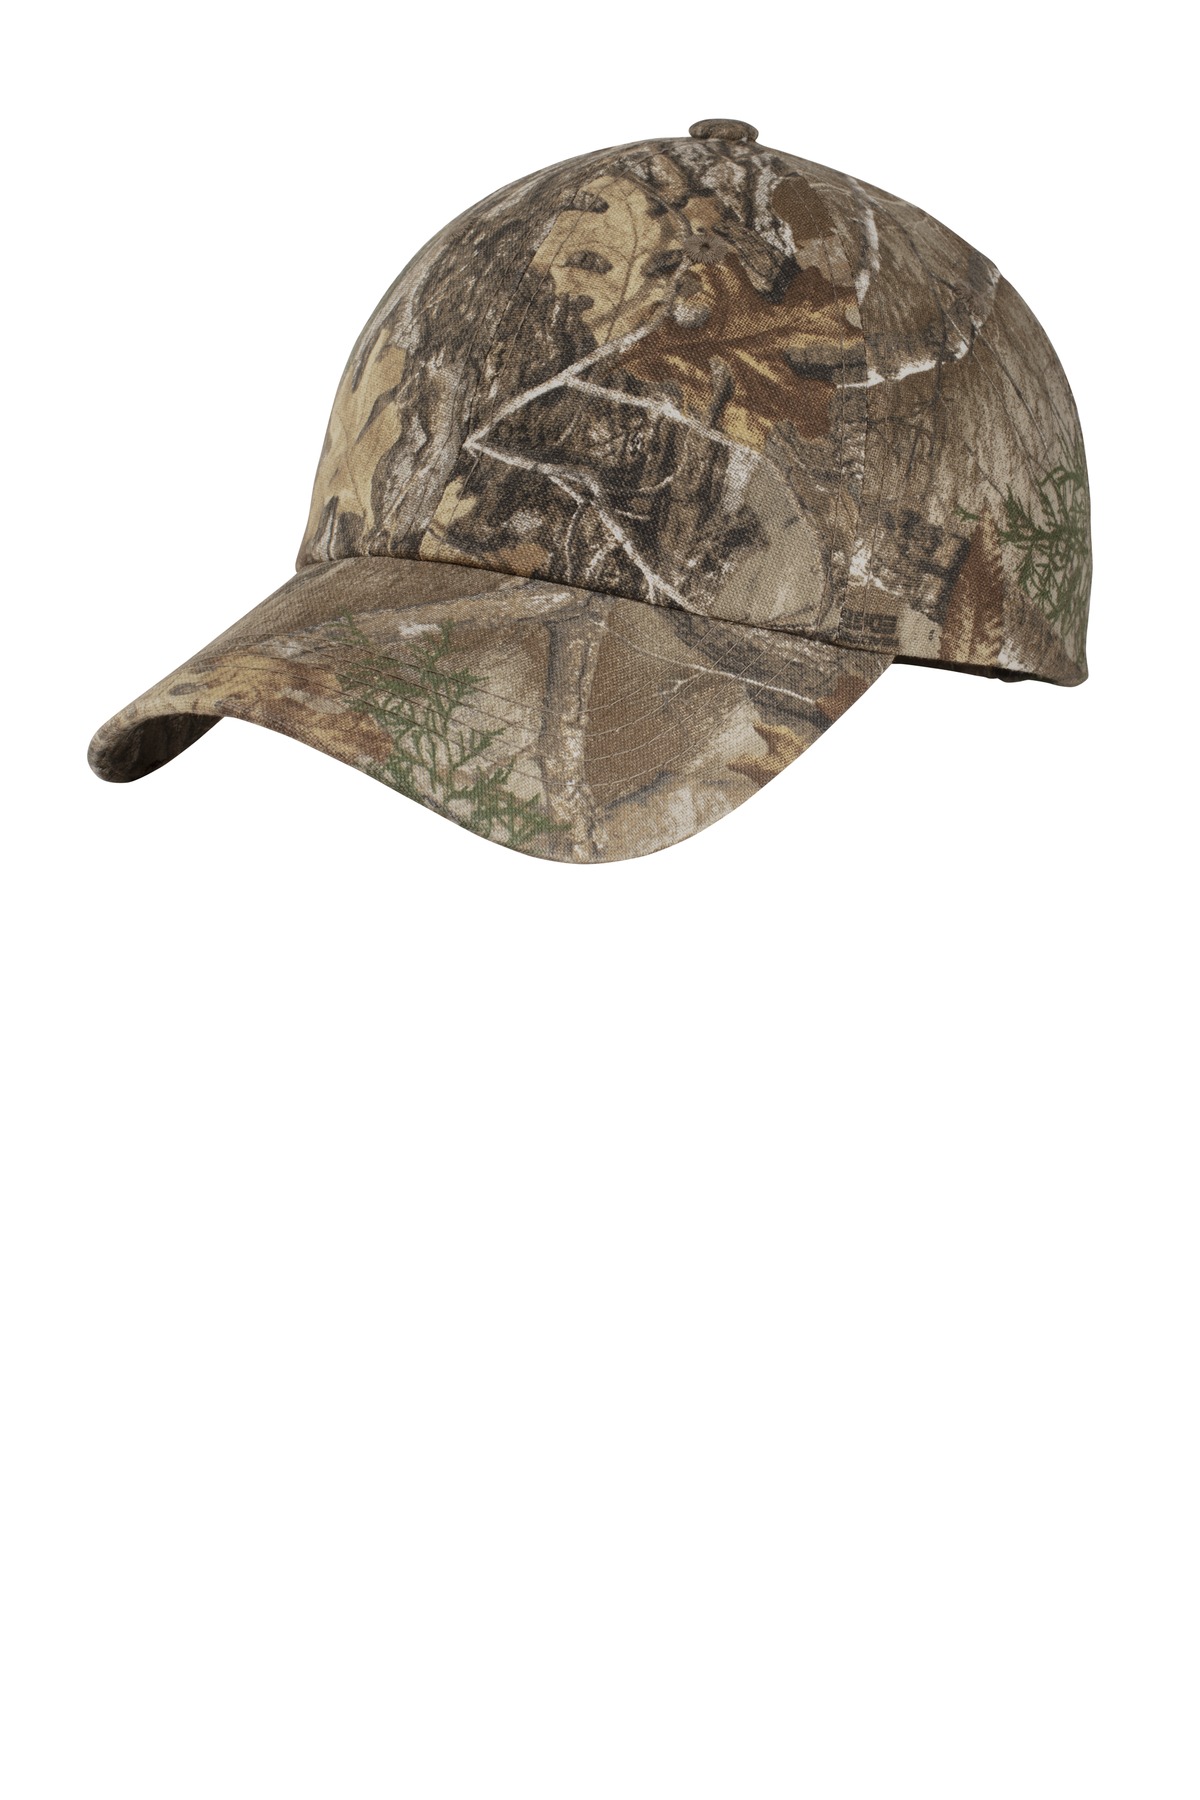 Selected Color is Realtree Edge